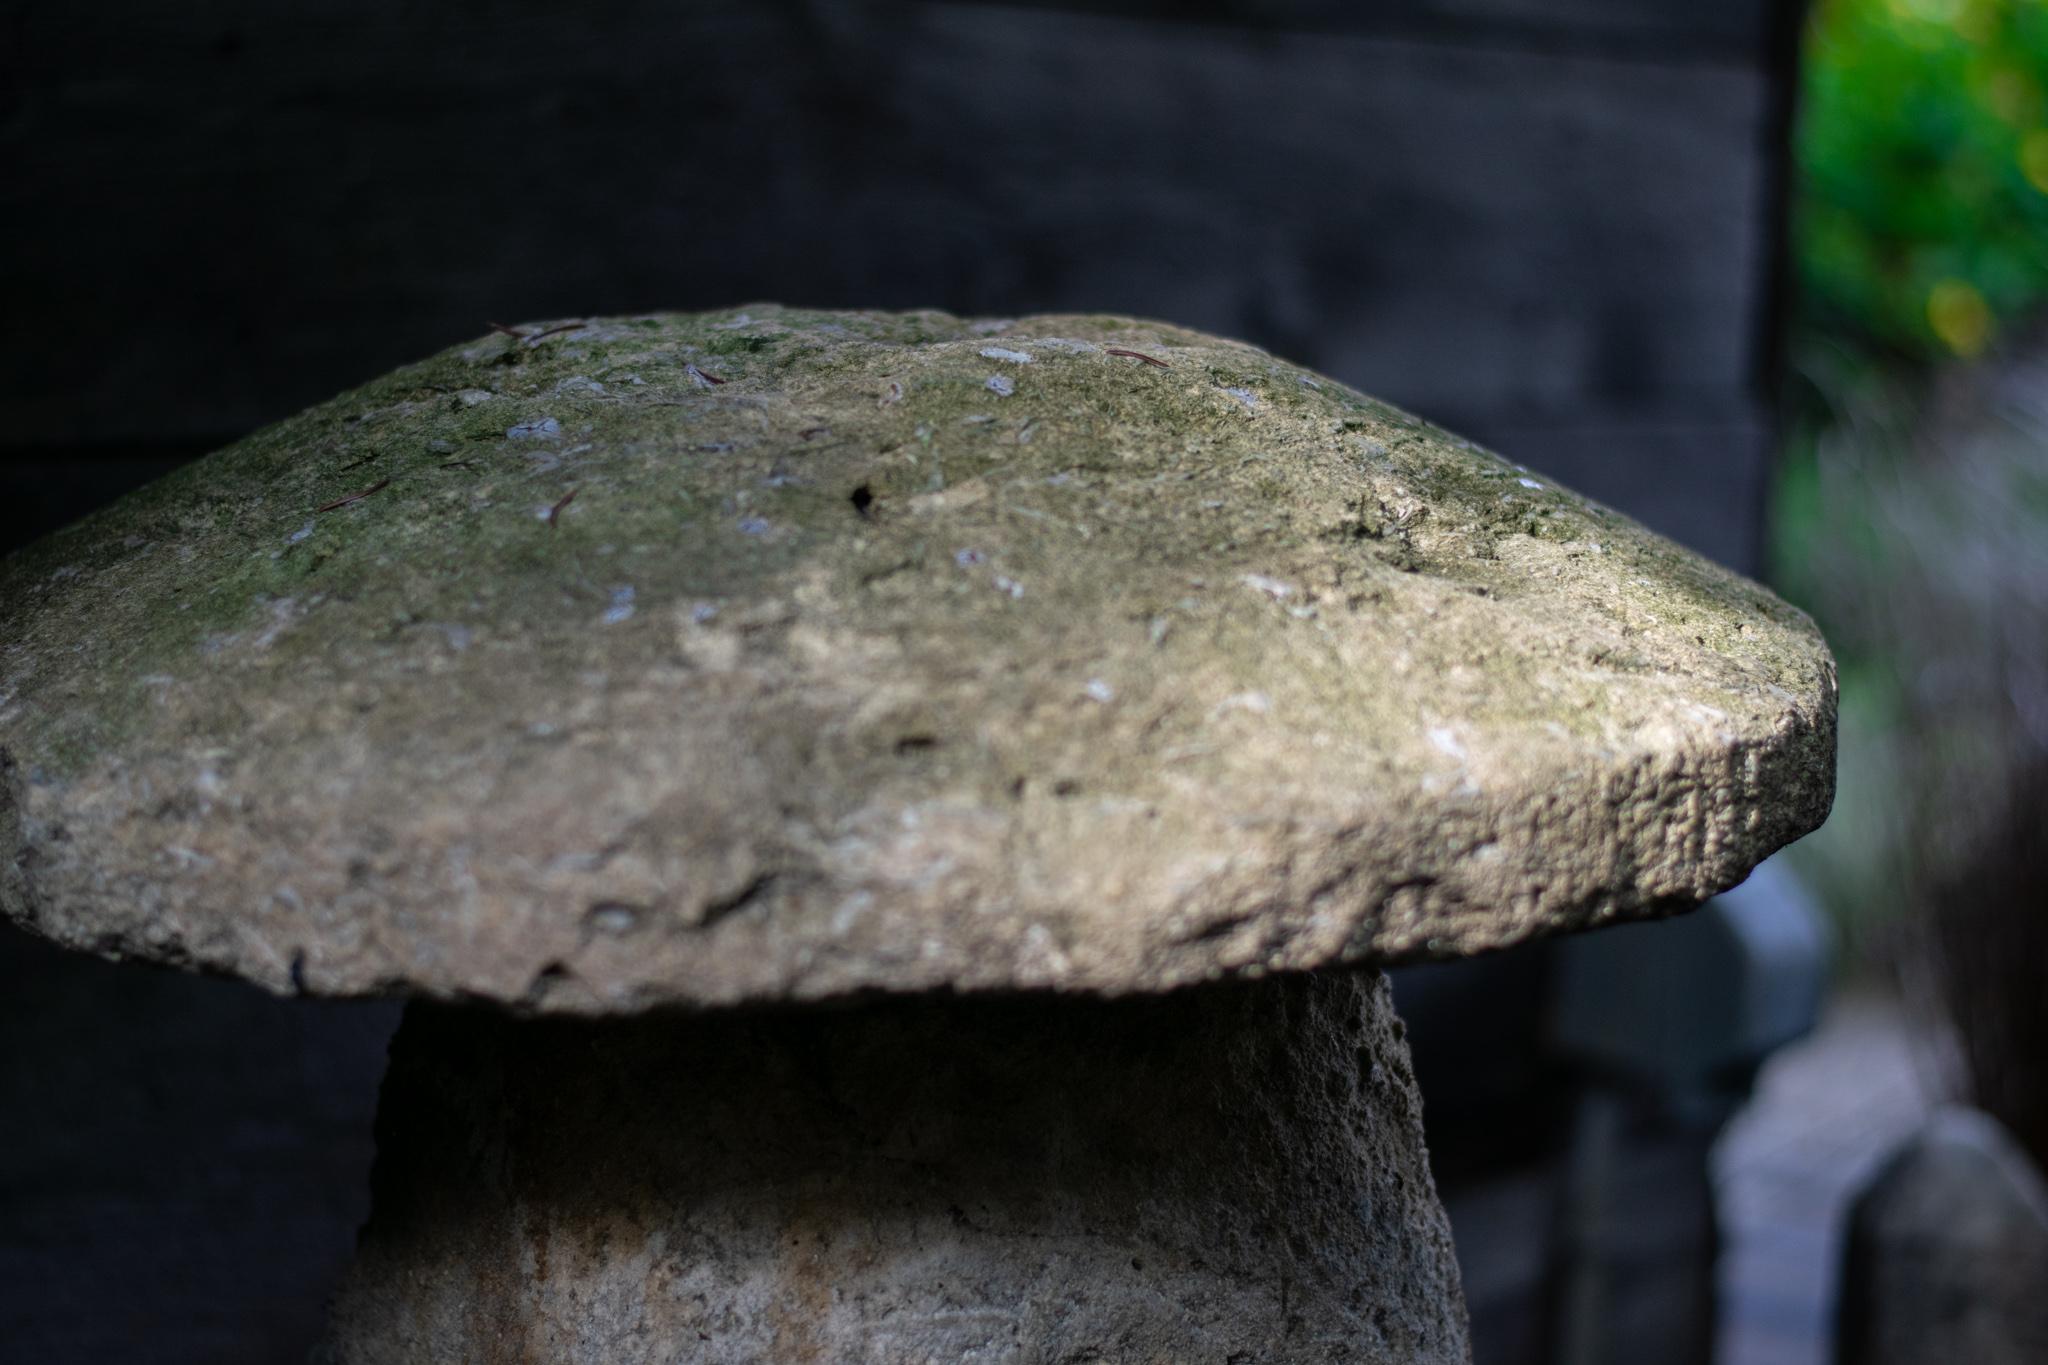 Staddle stones have a long agricultural history in Europe as a clever way to support granaries, hay ricks, and beehives. Once elevated, the stones prevented the intrusion of mice and other critters from the edible goods and grains above. This